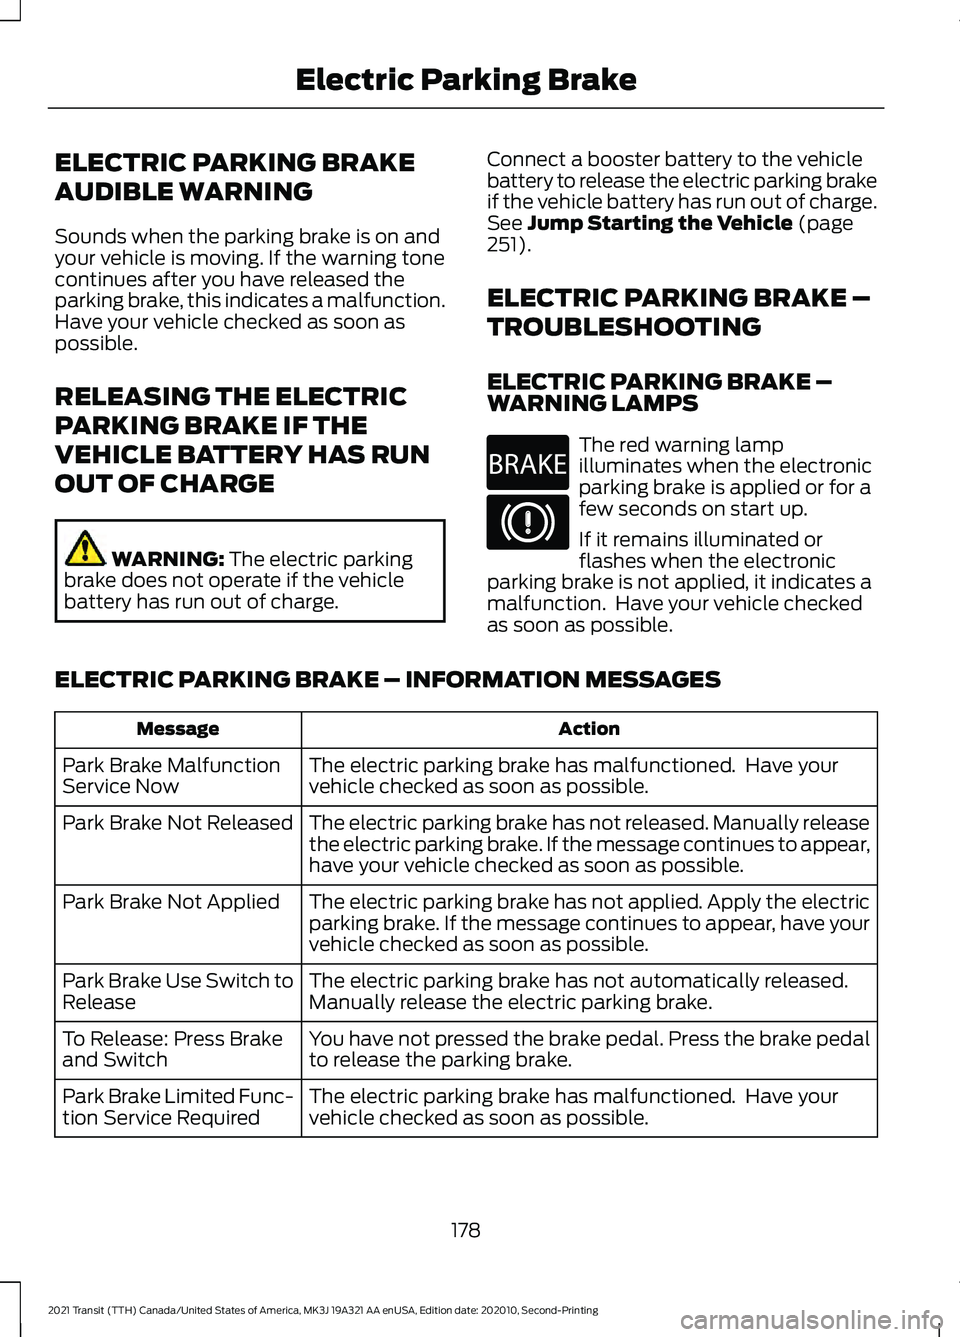 FORD TRANSIT 2021  Owners Manual ELECTRIC PARKING BRAKE
AUDIBLE WARNING
Sounds when the parking brake is on and
your vehicle is moving. If the warning tone
continues after you have released the
parking brake, this indicates a malfunc